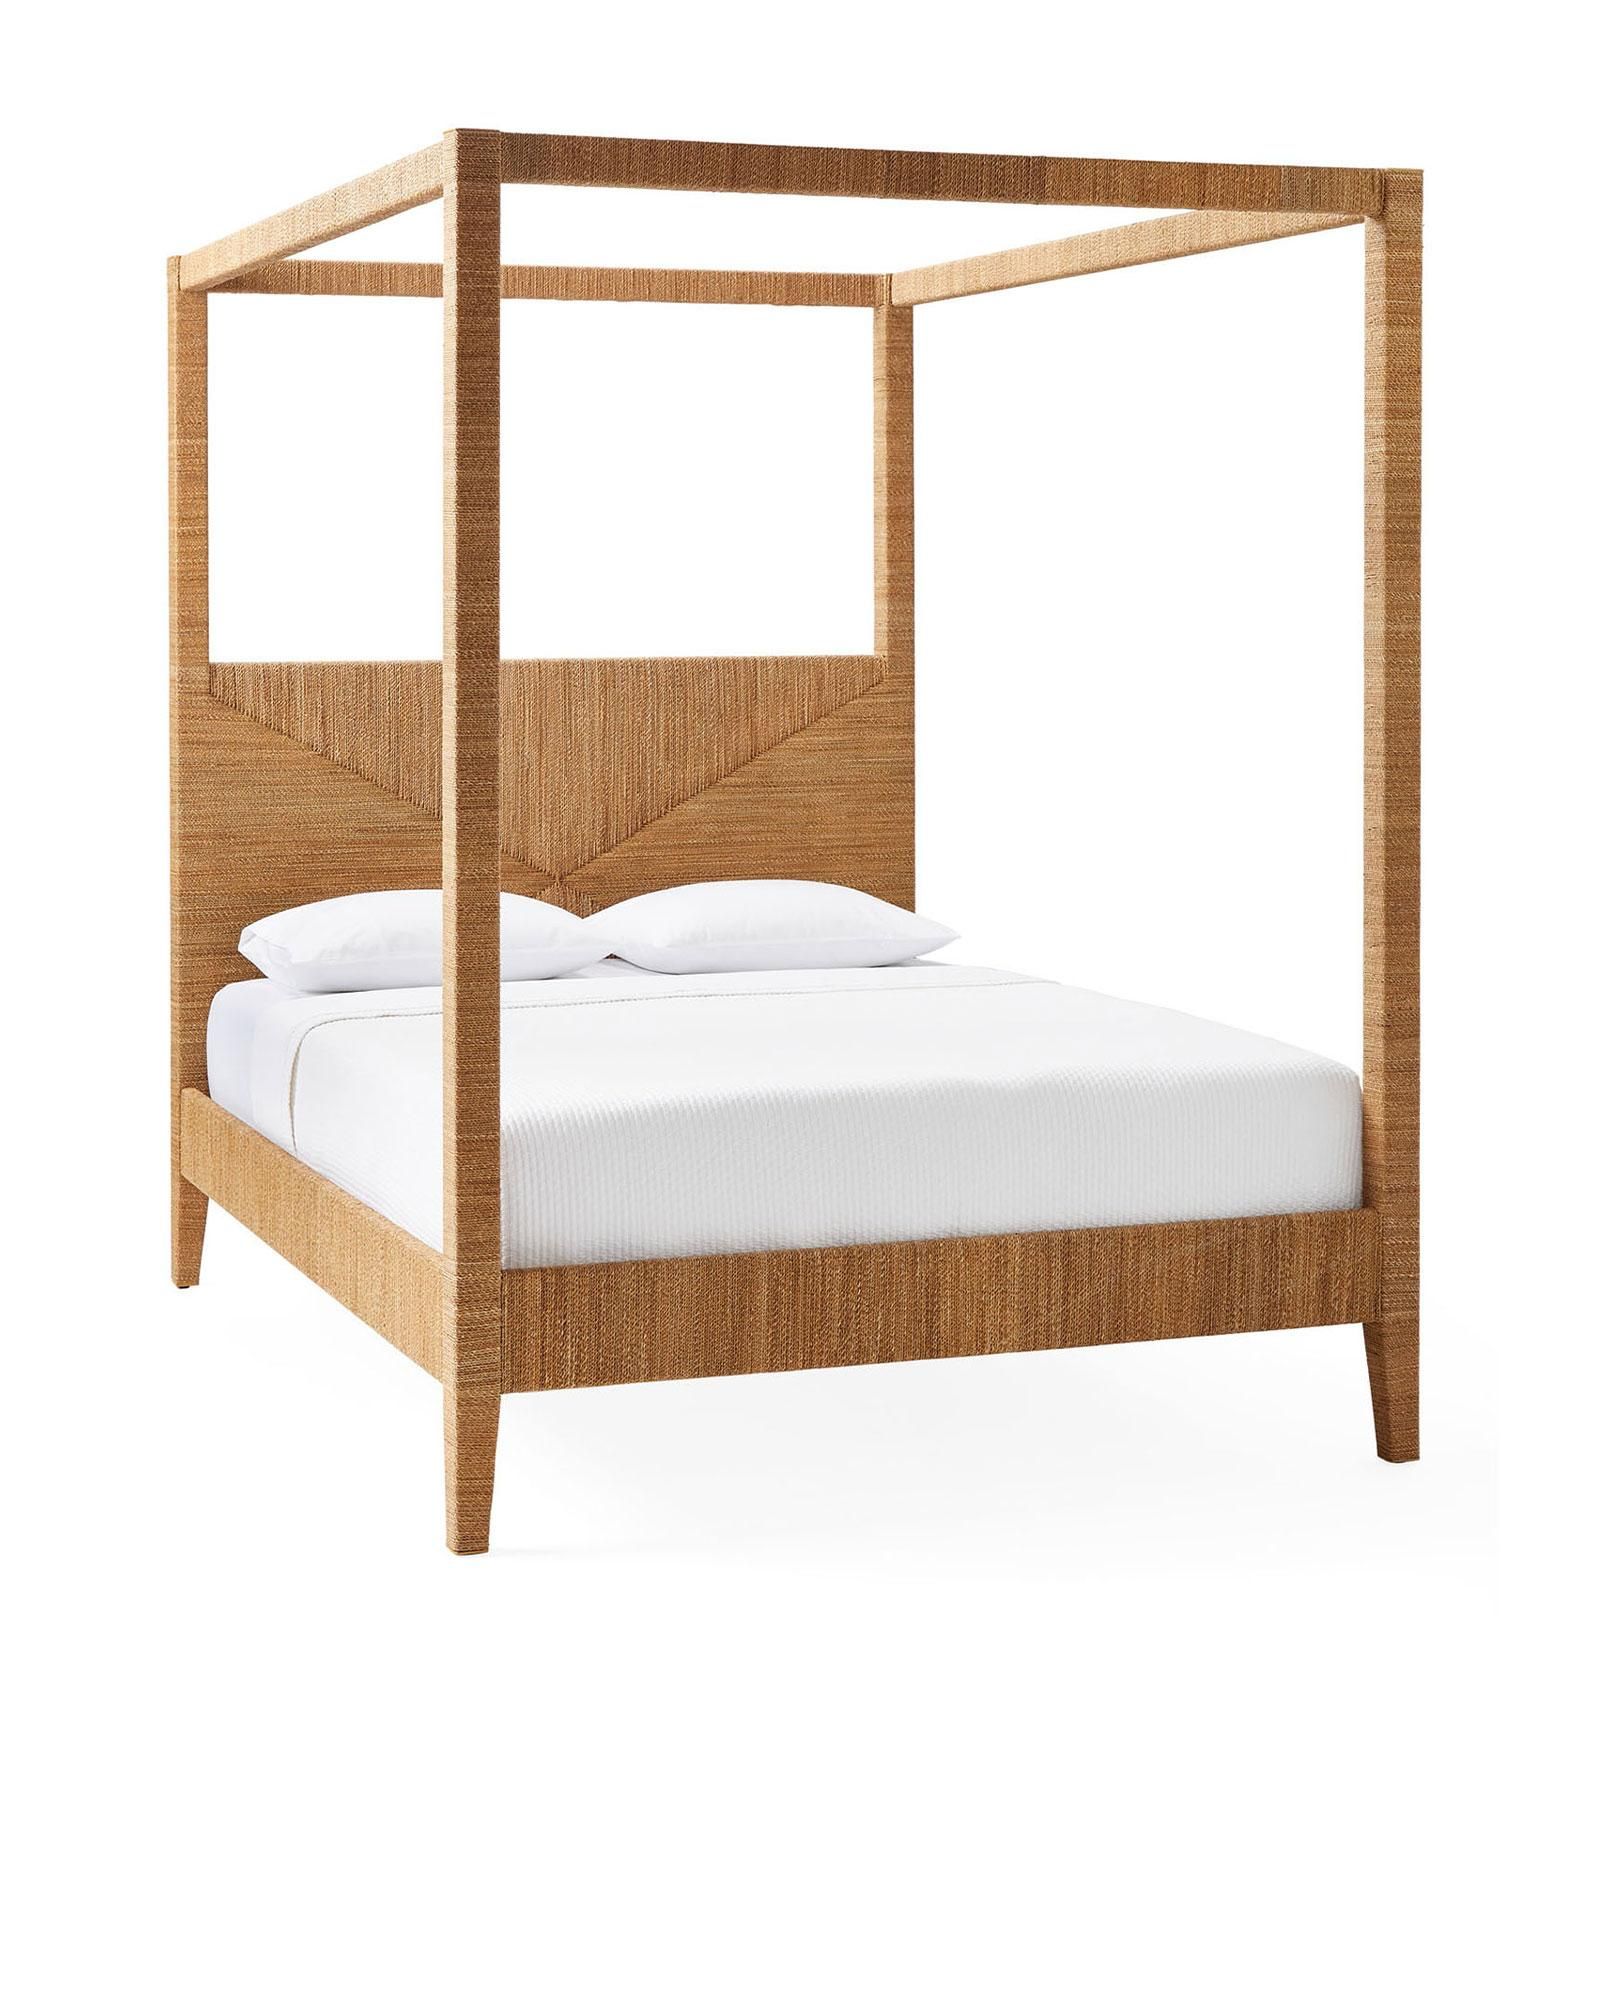 Hughes Four Poster Bed | Serena and Lily